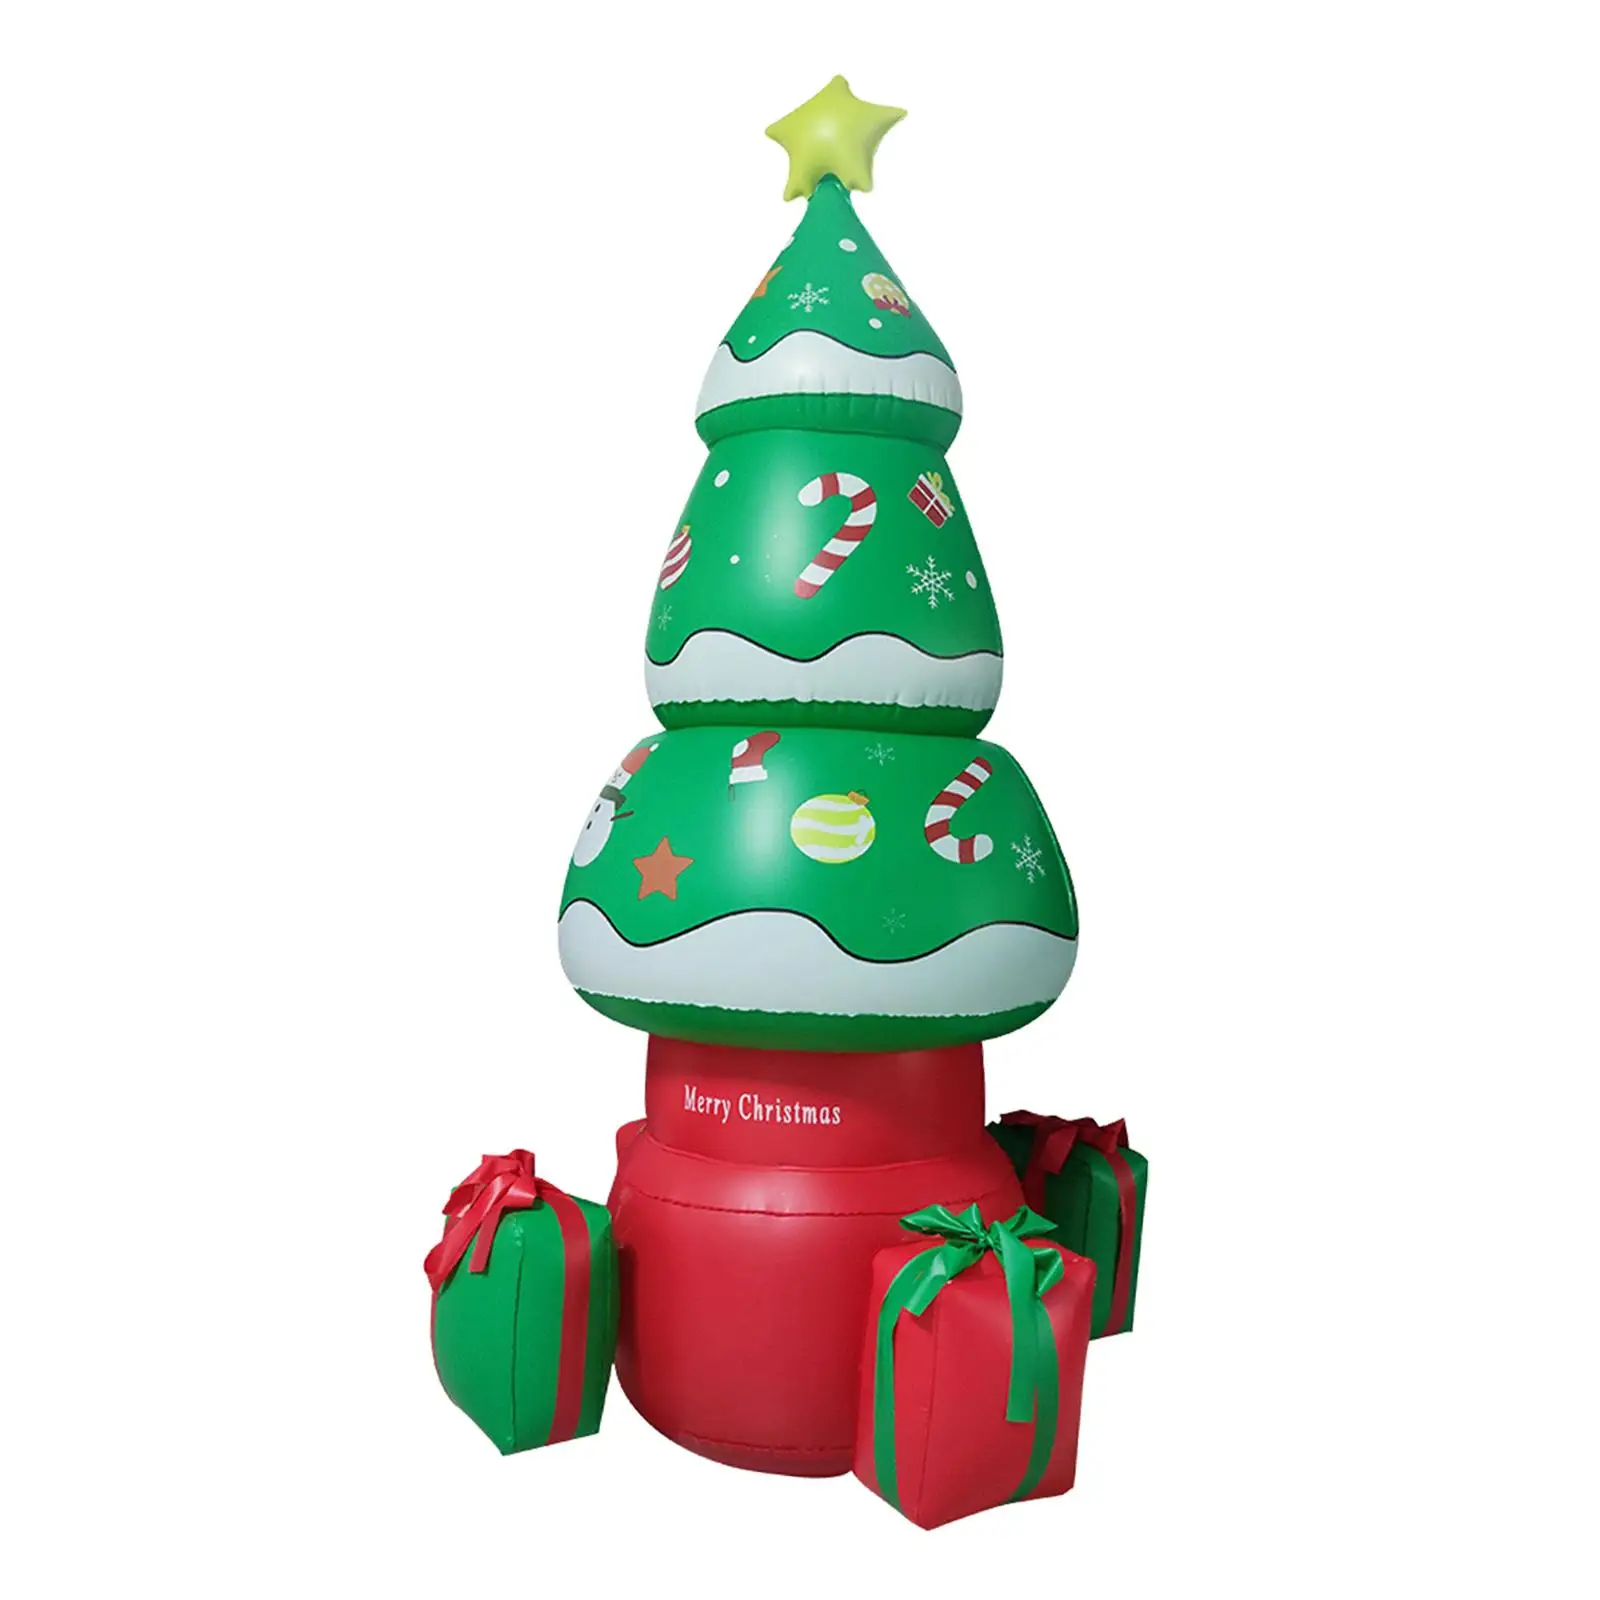 5.6ft Inflatable Christmas Tree Lighted Bright LED Xmas Tree Decorative Tree for Garden Holiday Lawn Outdoor Decor